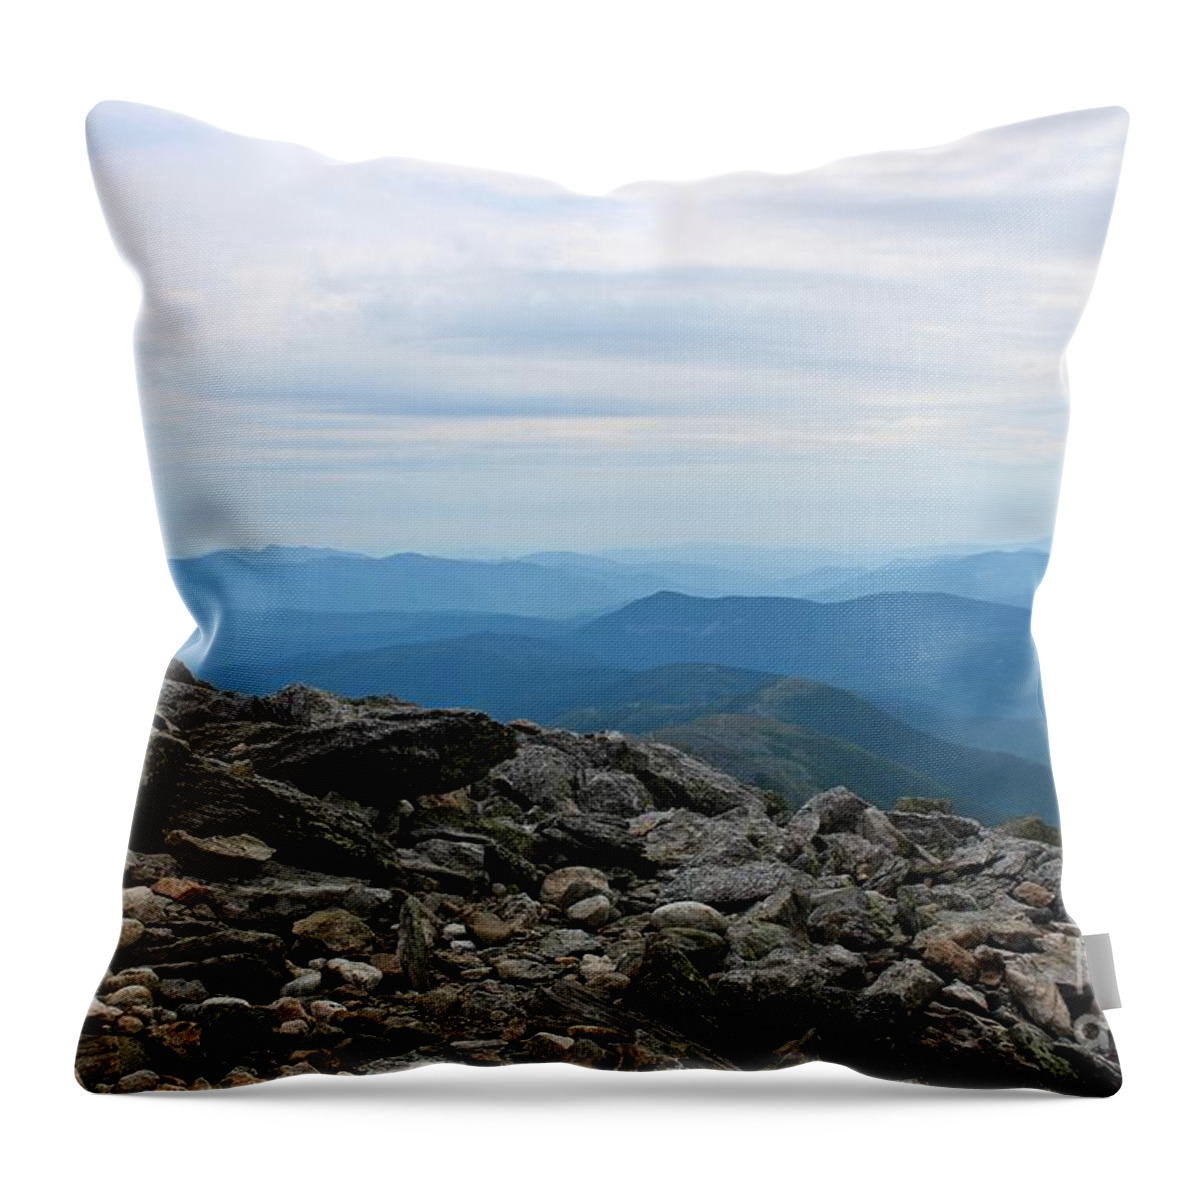 Mt. Washington Throw Pillow featuring the photograph Mt. Washington 9 by Deena Withycombe